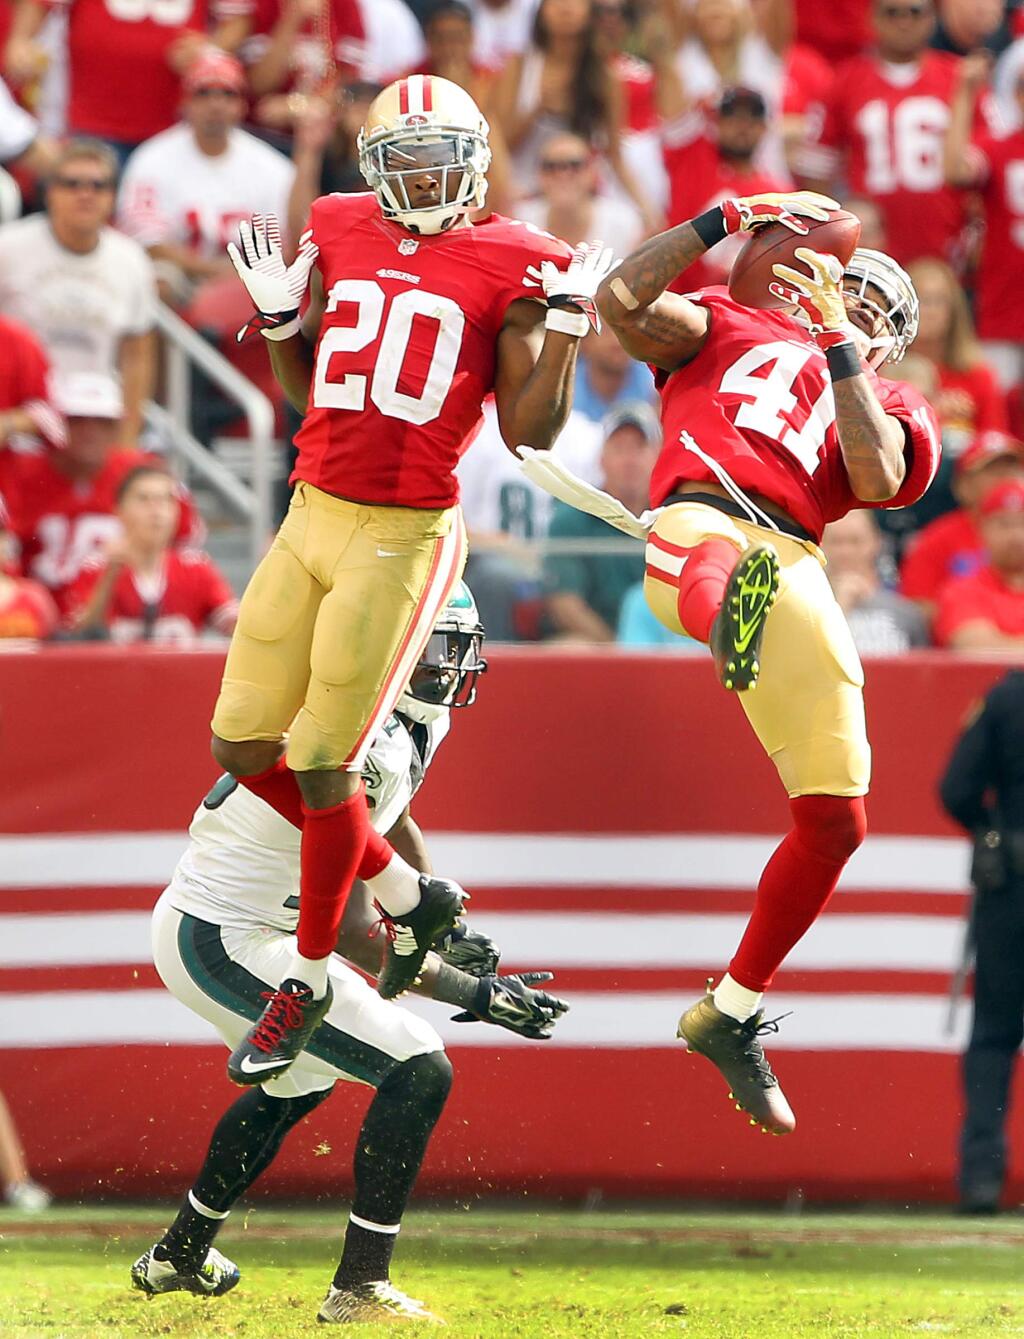 Antoine Bethea intercepts a Nick Foles pass in the 4th quarter while Perrish Cox avoids the collision. The 49ers beat the Eagles, 26-21, at Levi Stadium on Sunday, September 28, 2014.